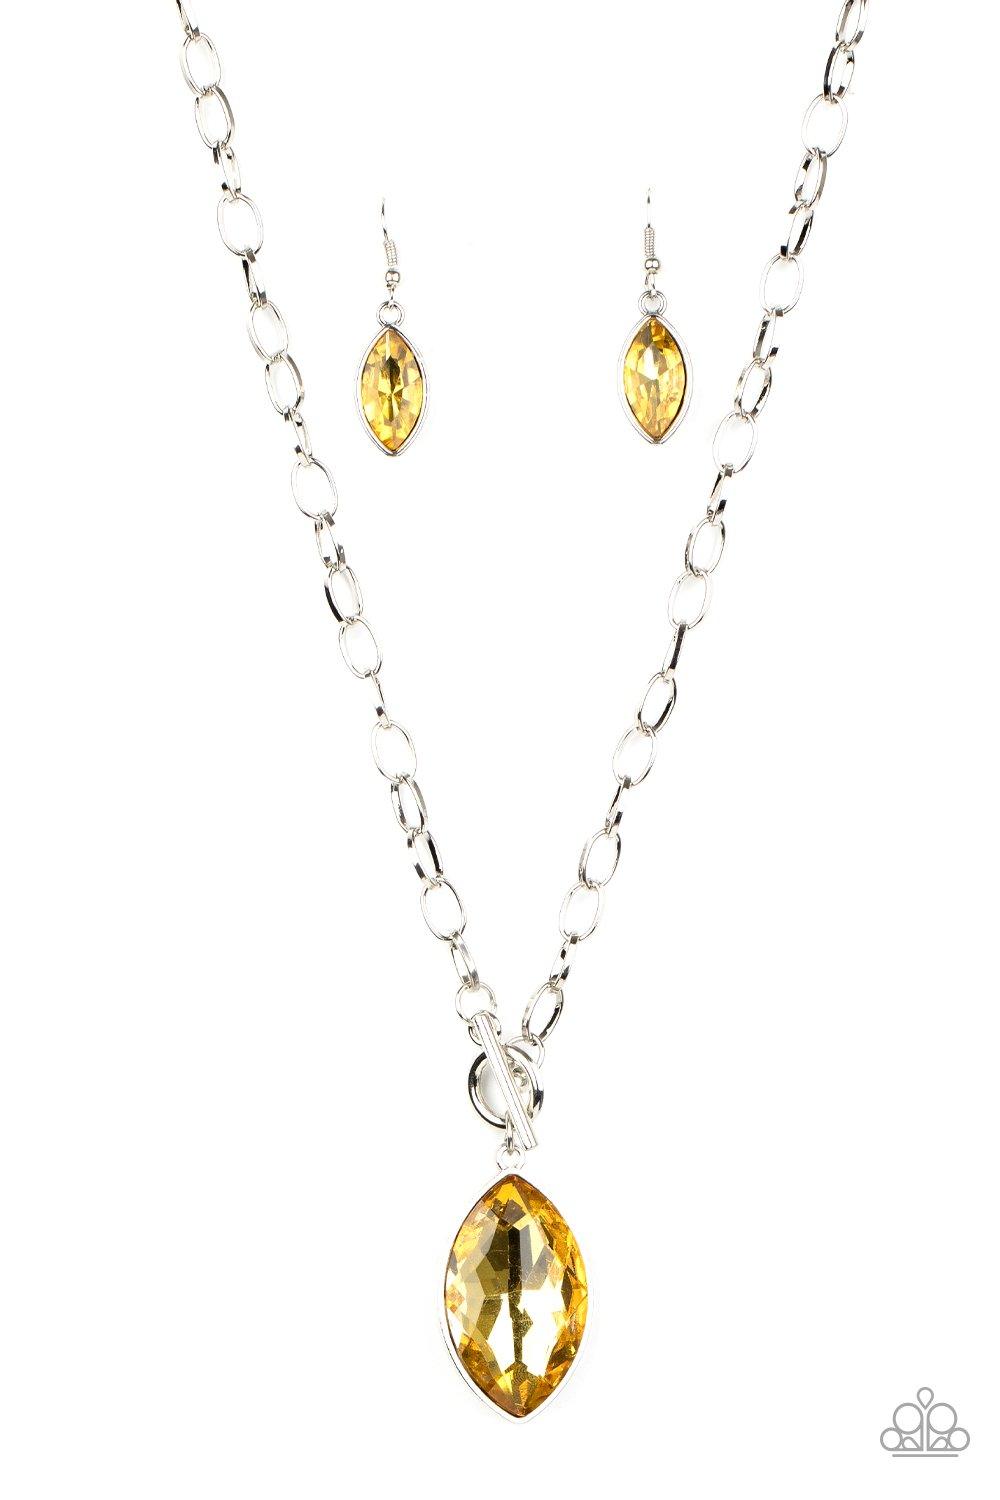 Paparazzi - Rural Revival Yellow Necklace Paparazzi Accessories Vivacious  Bombshell Bling Jenny and James Davison – Vivacious Bombshell Bling, LLC,  Jenny and James Davison